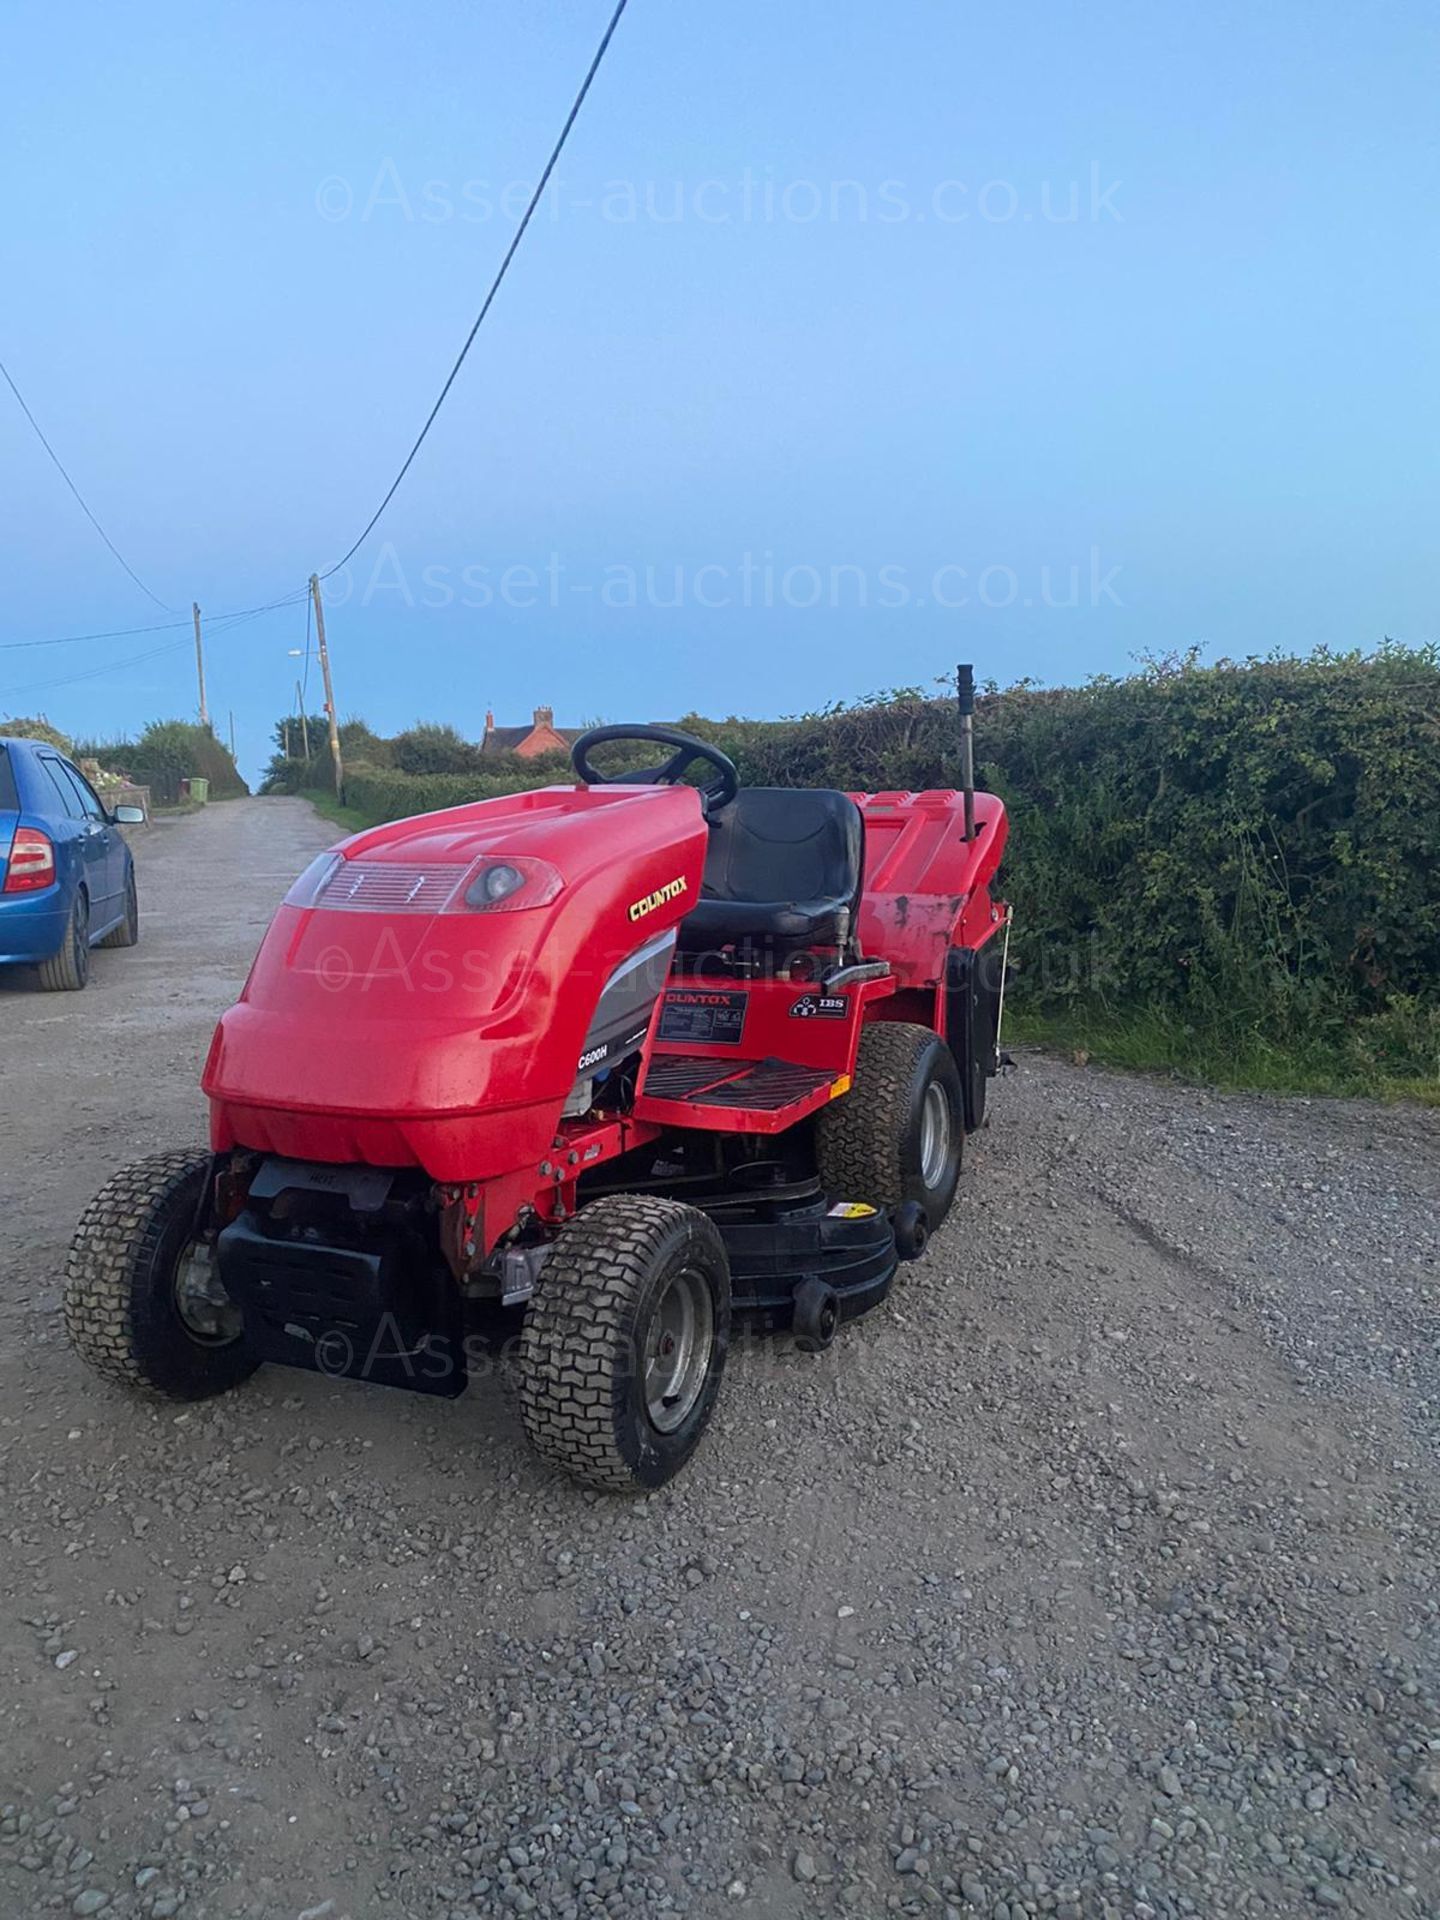 COUNTAX C600H RIDE ON LAWN MOWER, 4 WHEEL DRIVE, CUTS AND COLLECTS *NO VAT* - Image 4 of 7